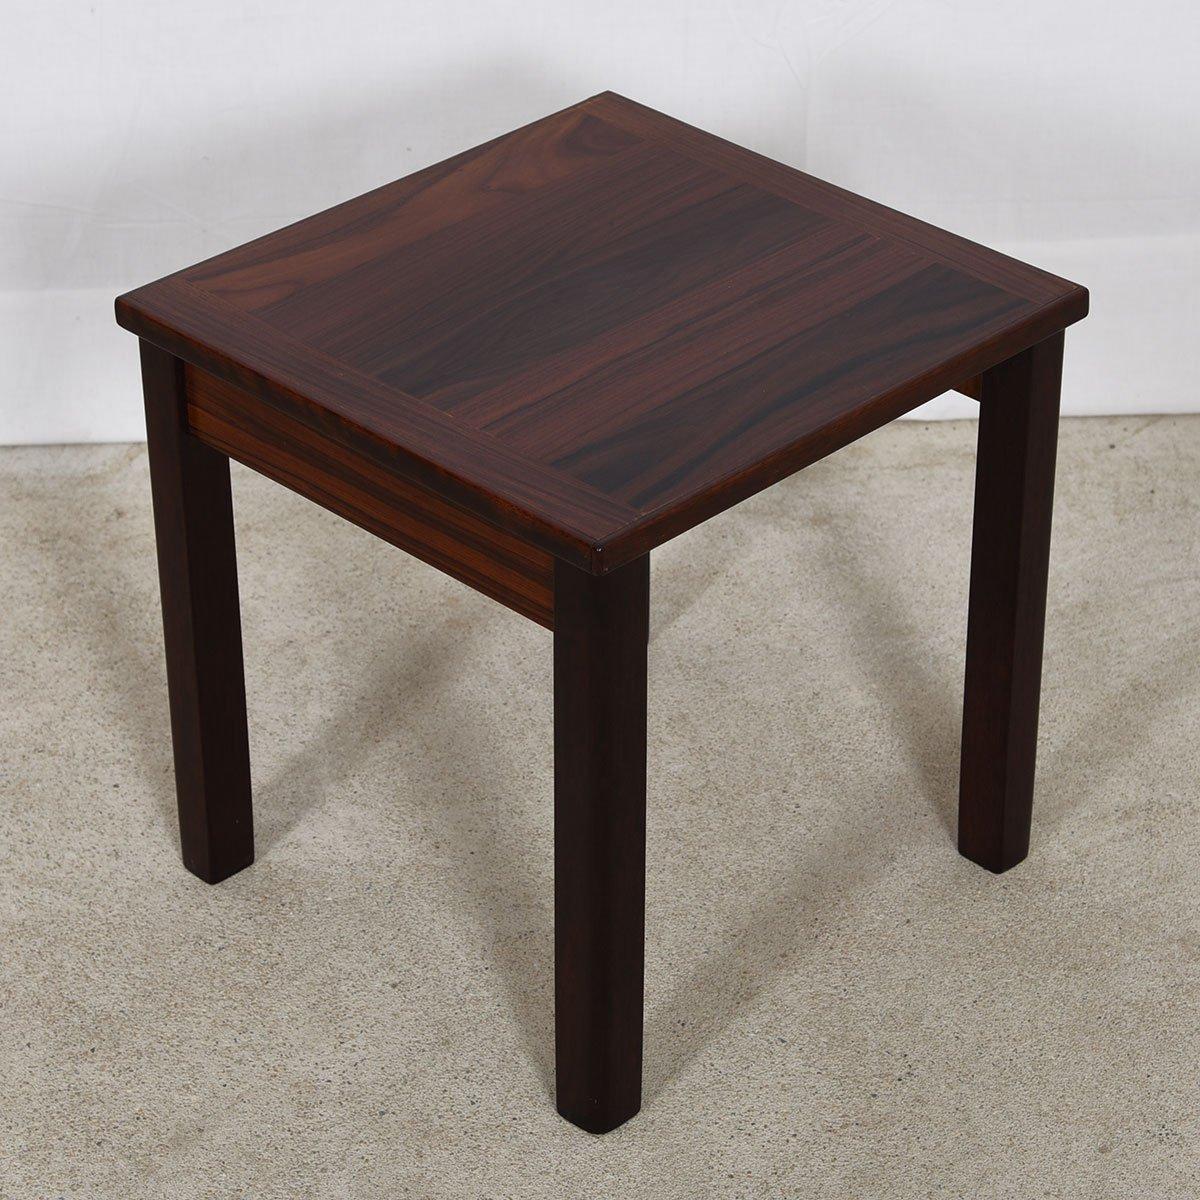 Set of 3 Danish Modern Nesting Tables in Rosewood In Good Condition For Sale In Kensington, MD